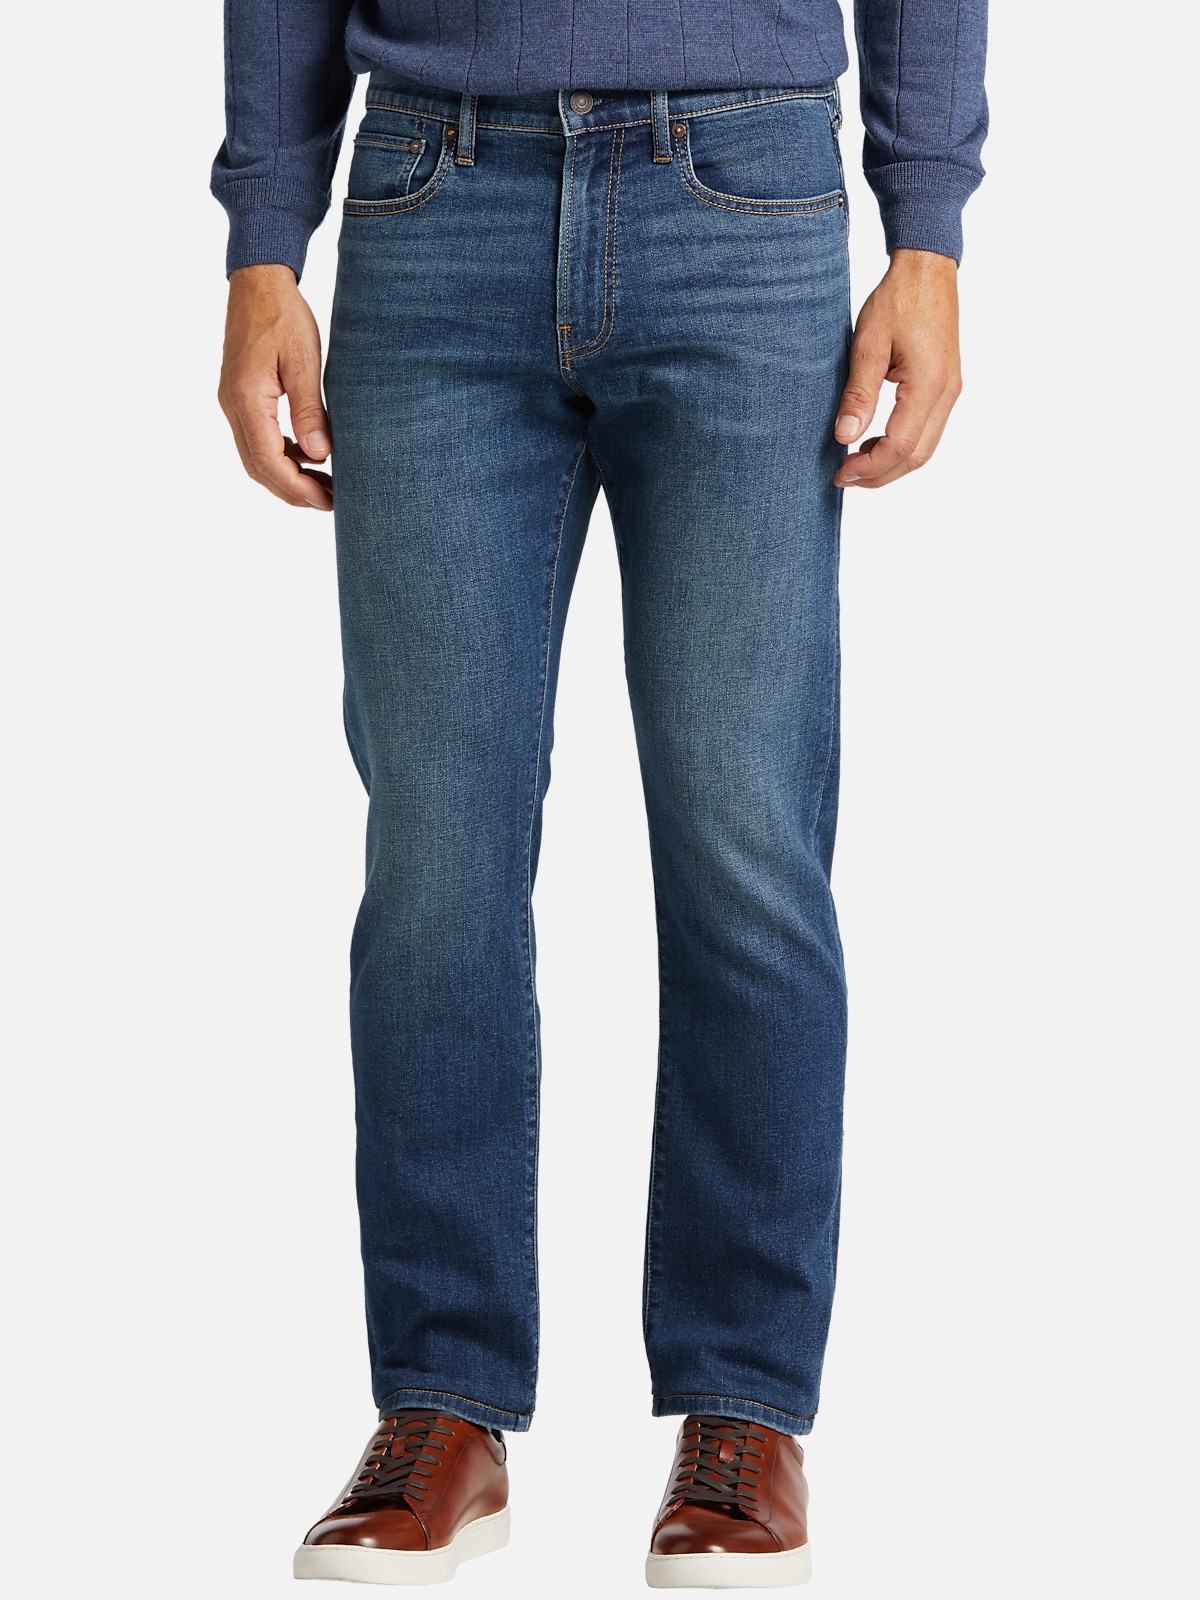 Lucky Brand 410 Suffolk Athletic Fit Jeans | All Sale| Men's Wearhouse